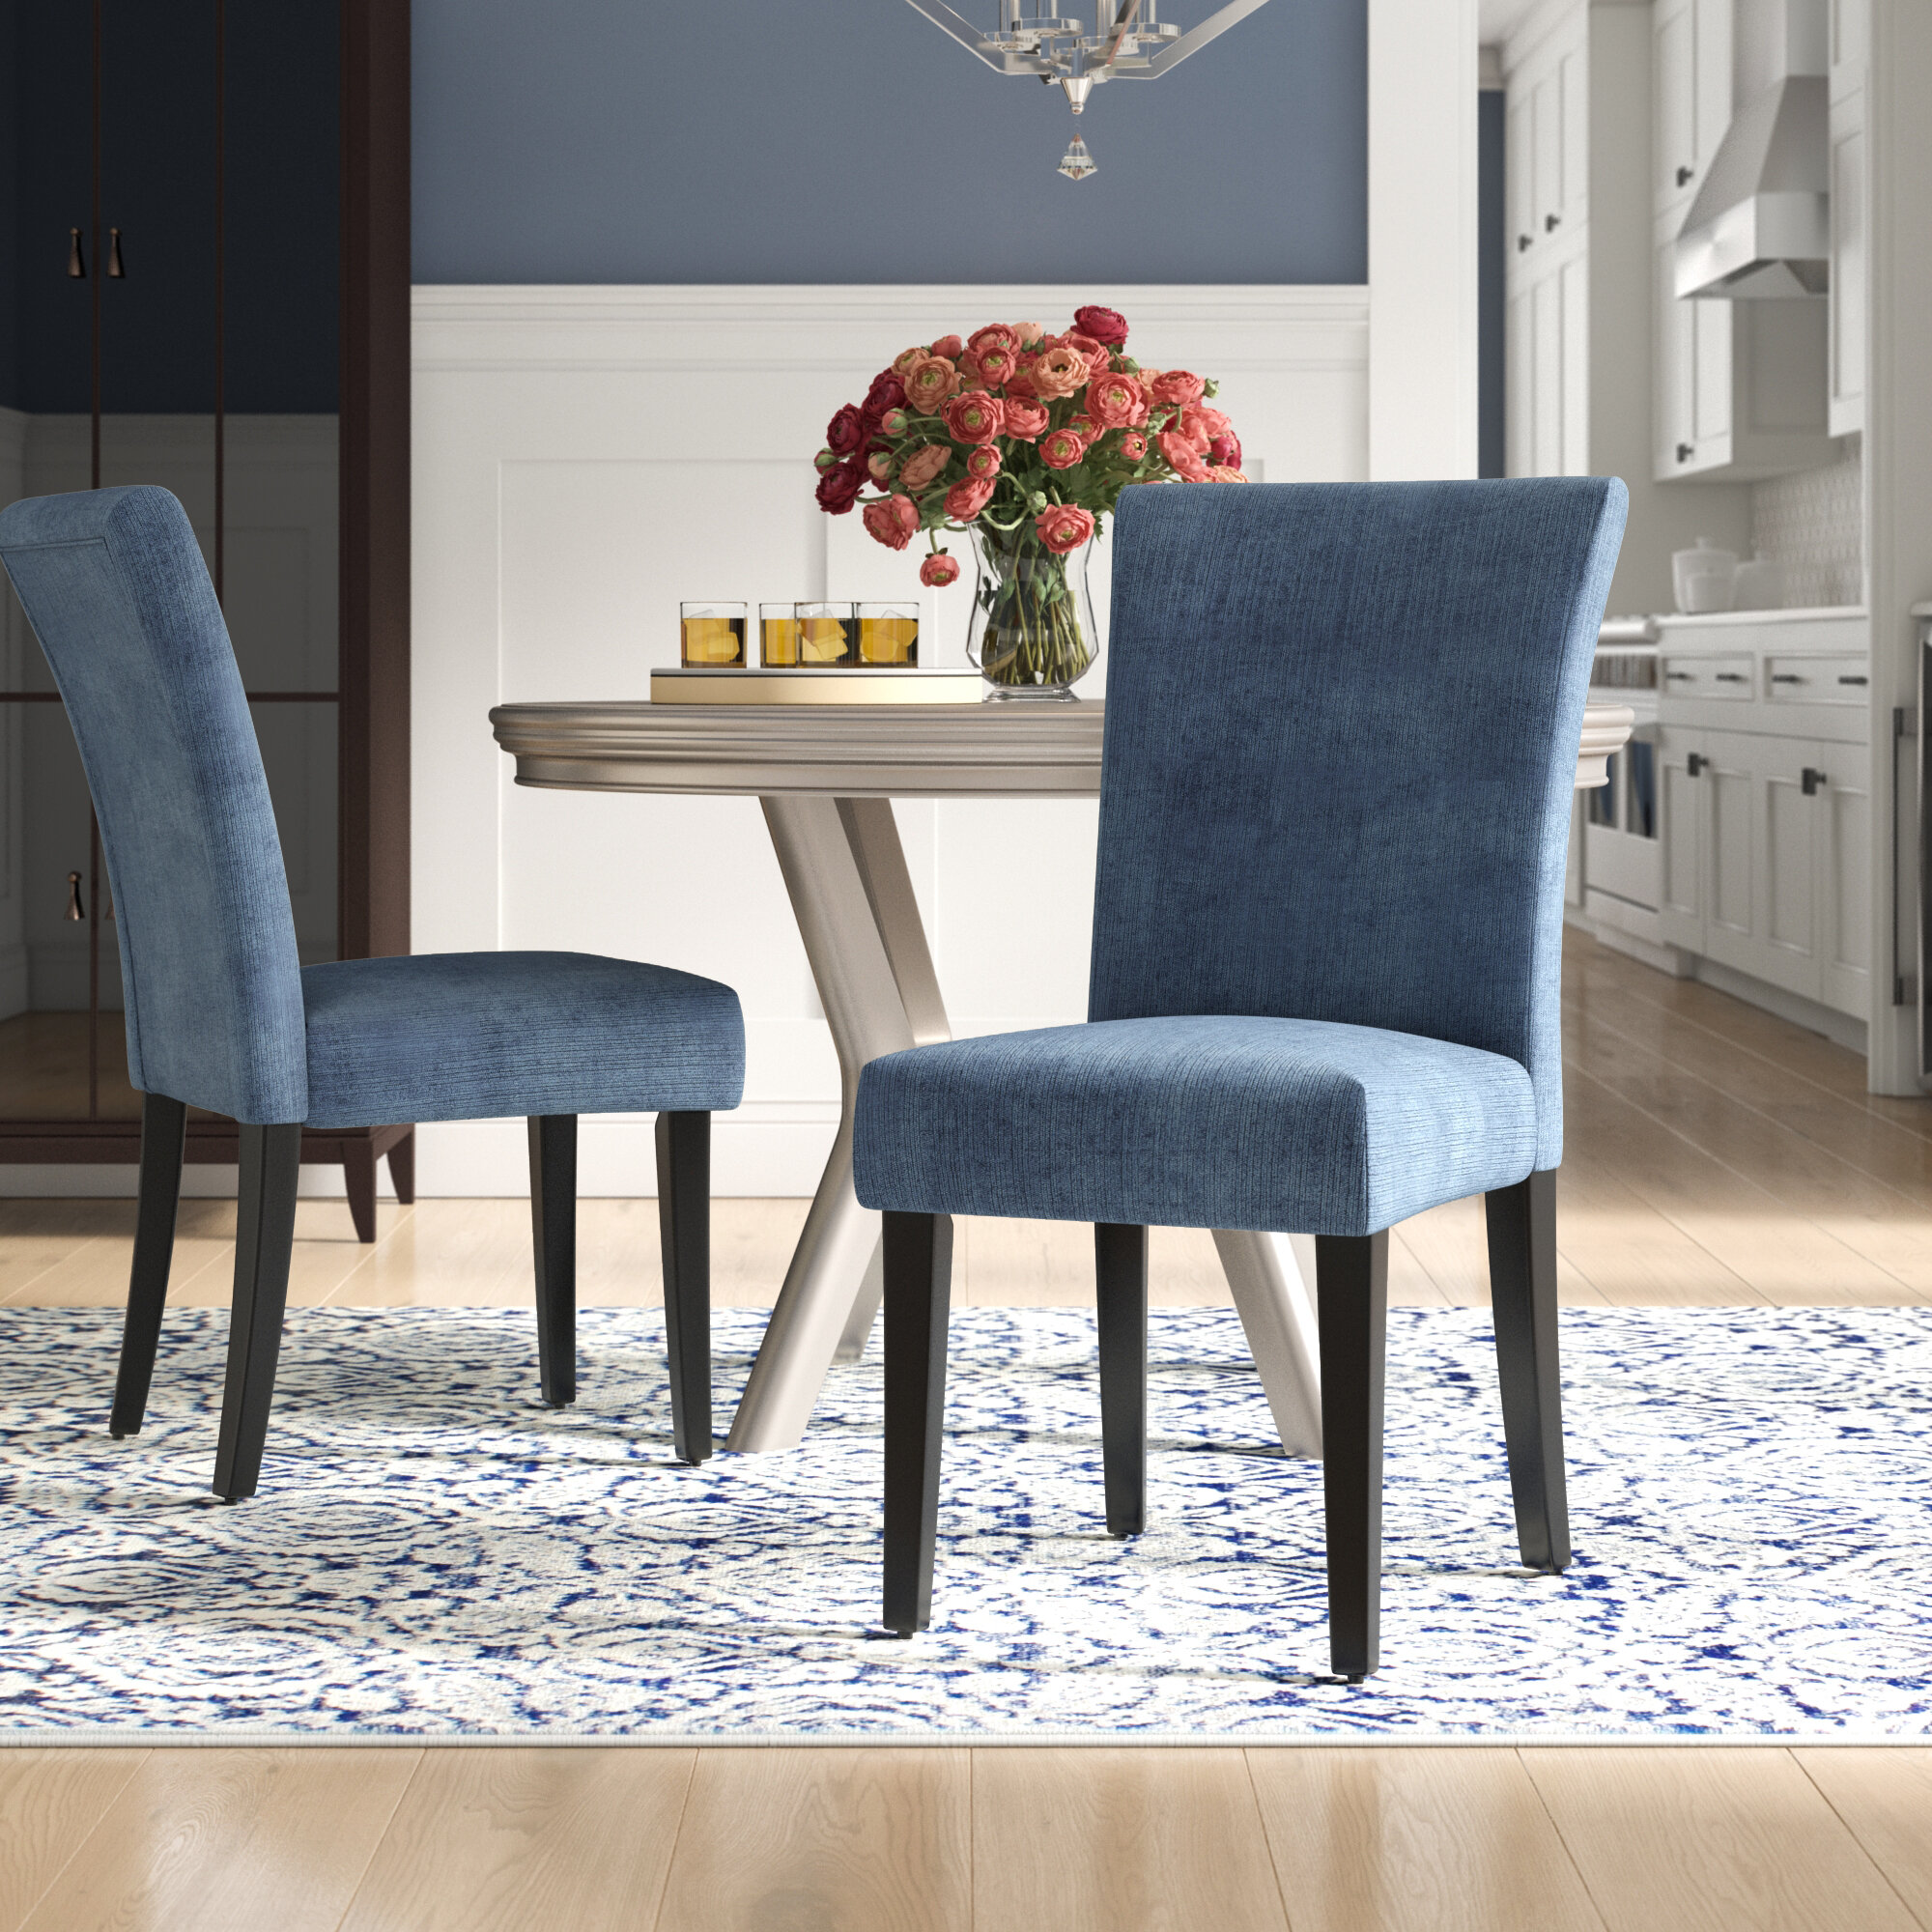 Nafort Fabric Dining Chairs with Copper Nails Blue Kitchen Living Room Chiars with Solid Wood Legs Set of 2 